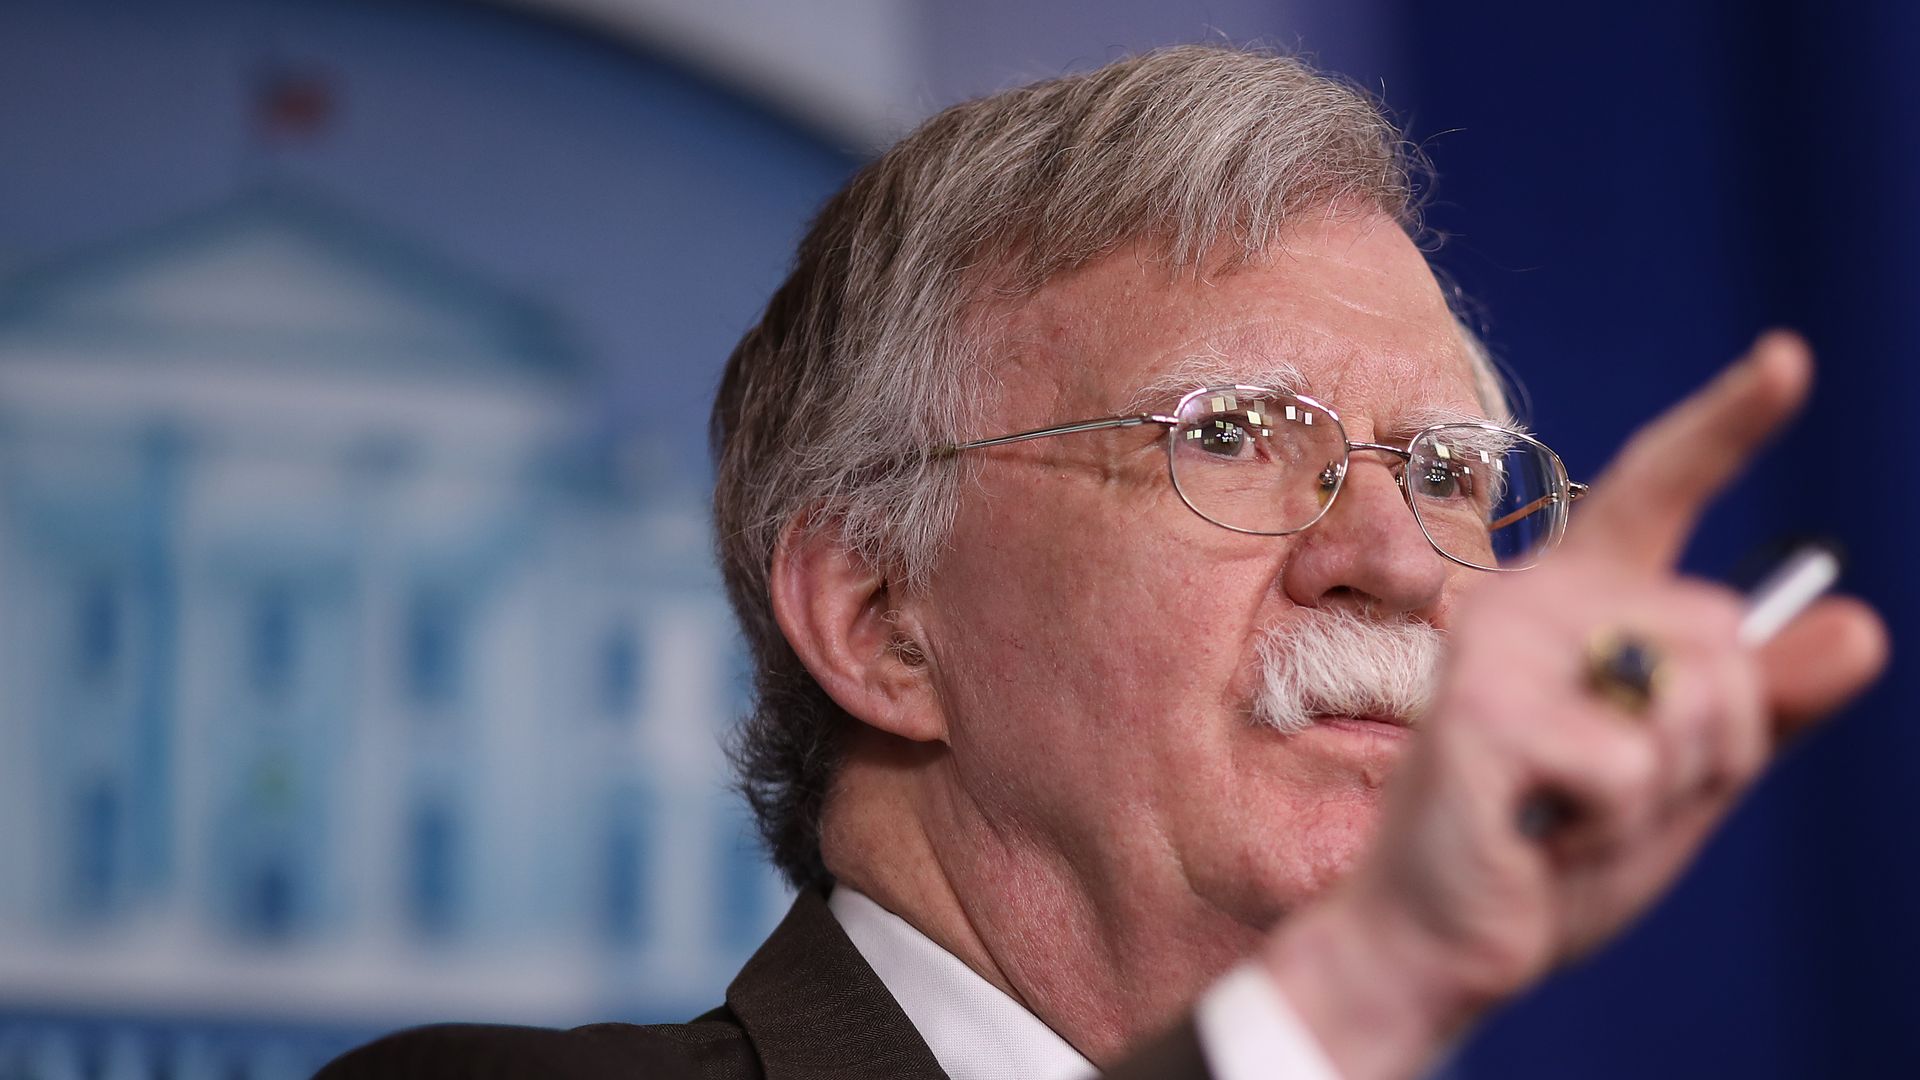 In this image, John Bolton waves a finger while speaking at a White house press briefing. 